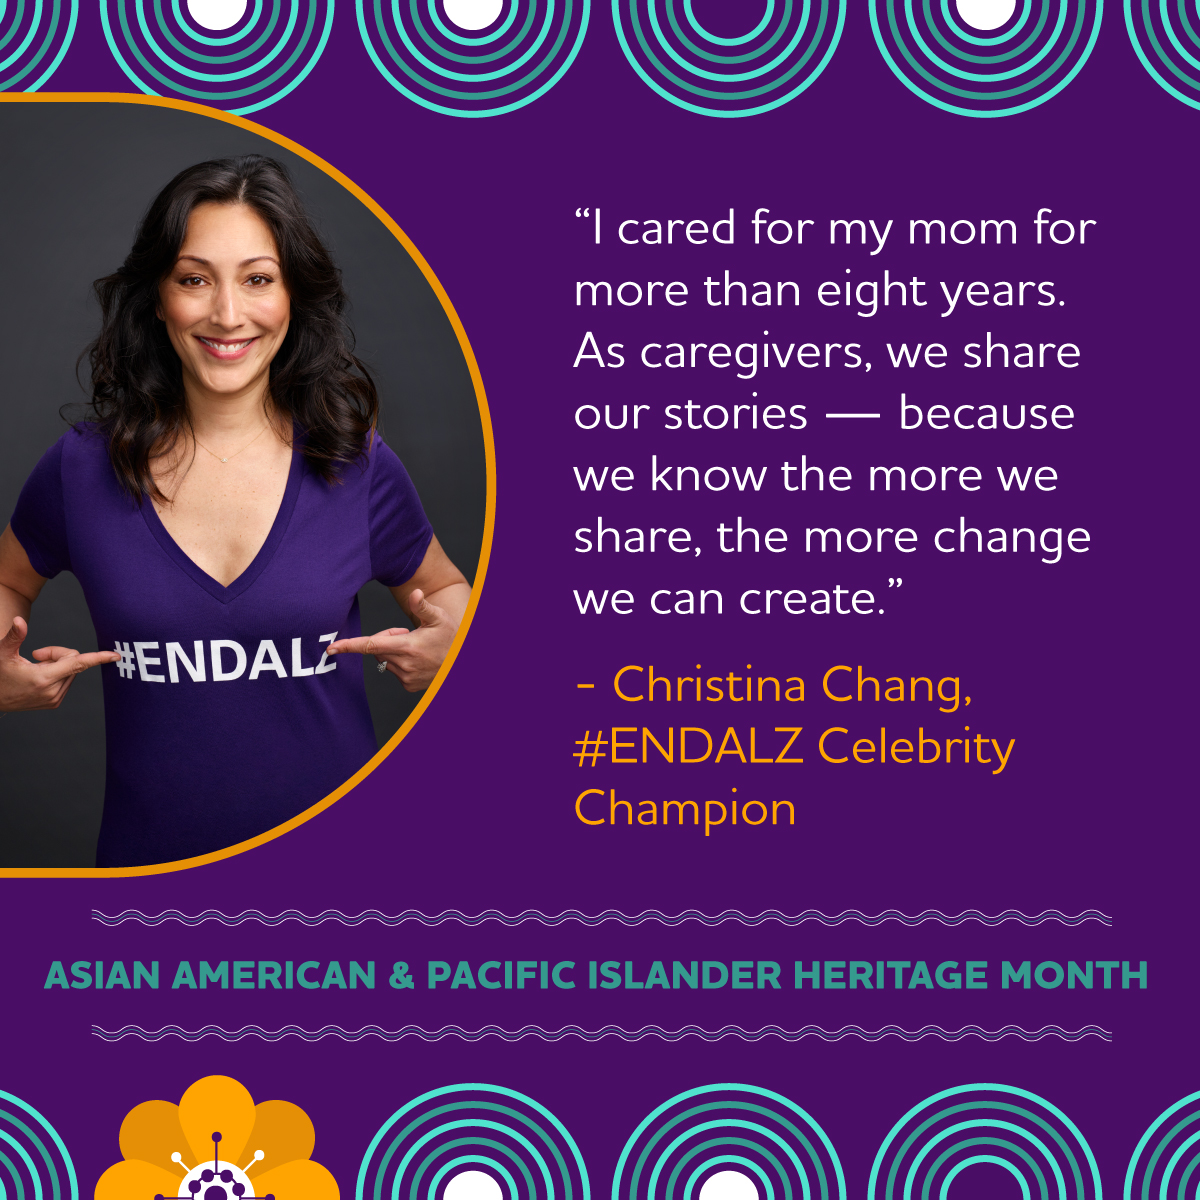 This month, we’re celebrating Asian Americans & Pacific Islanders, like actress and #ENDALZ Celebrity Champion @_ChristinaChang who is passionate about raising Alzheimer’s awareness in honor of her mom and all those impacted. #AAPIMonth #TheGoodDoctor @GoodDoctorABC